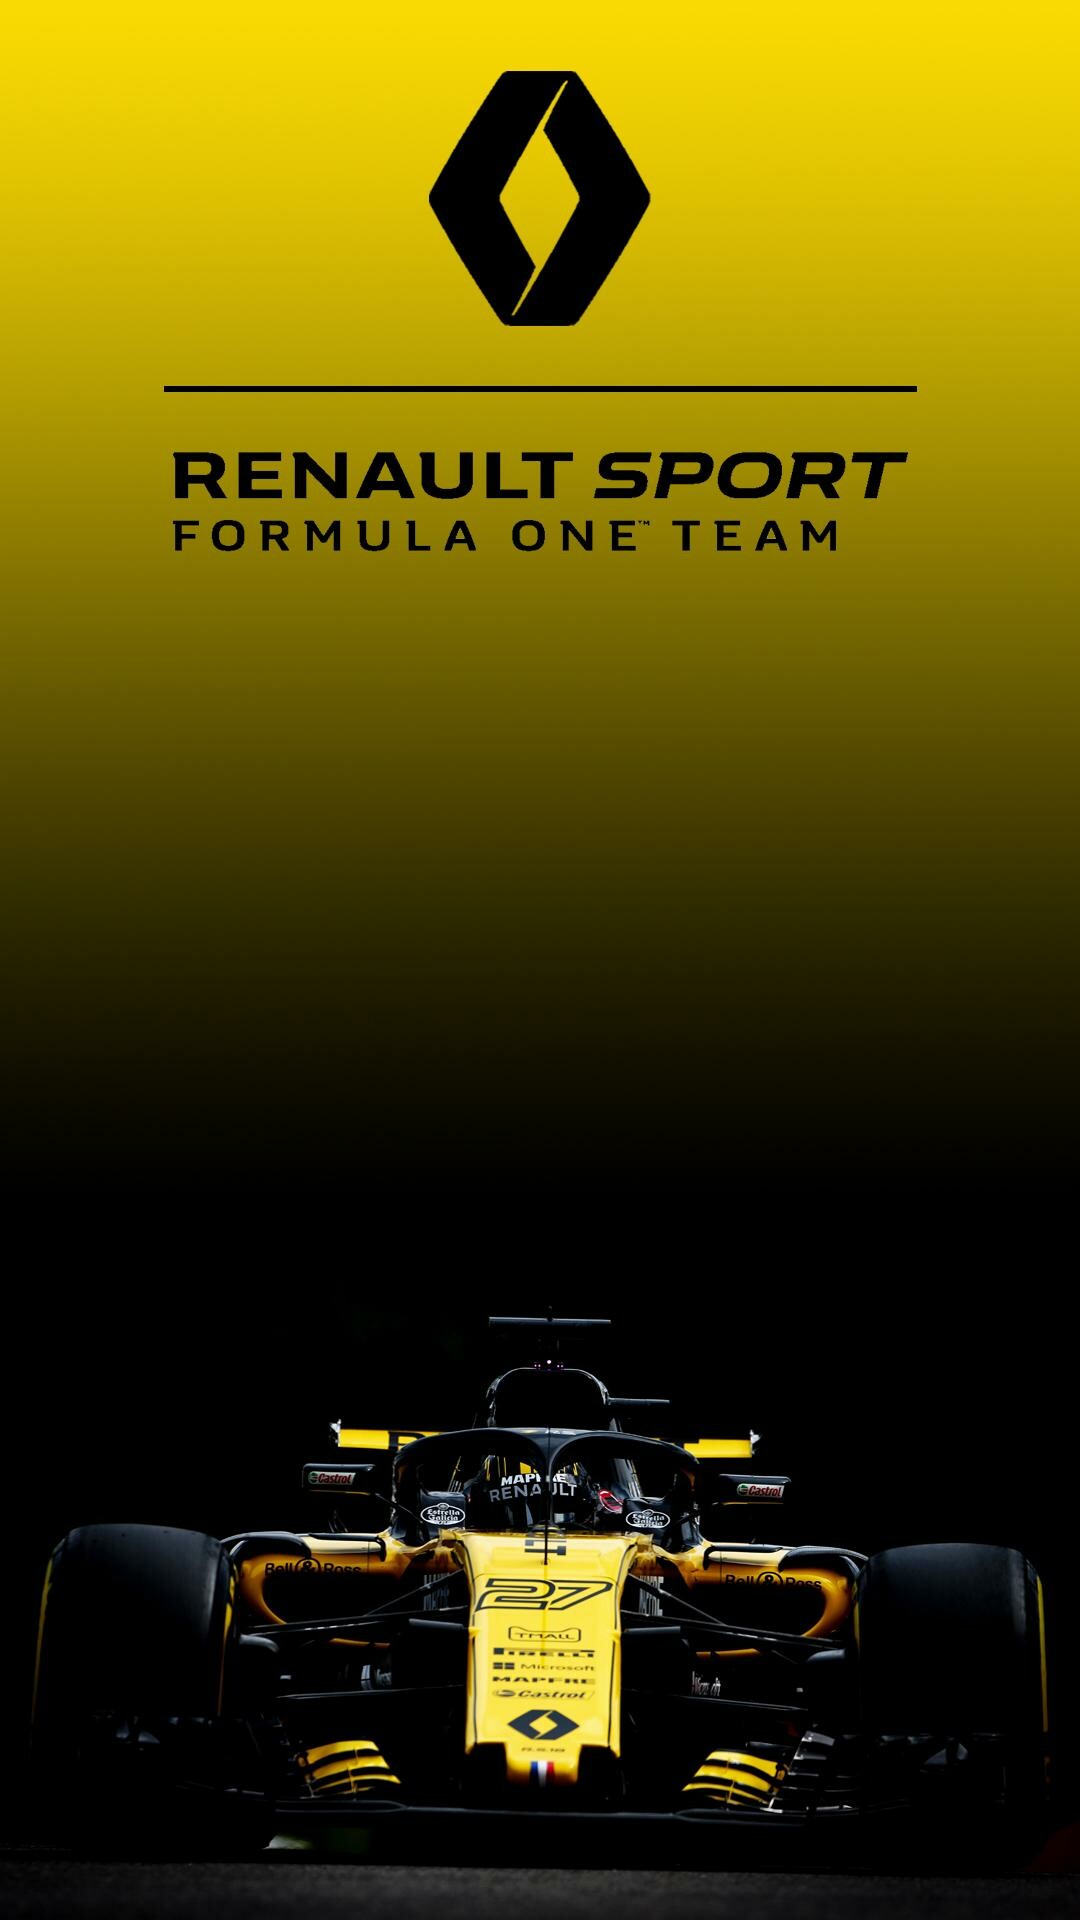 Renault: RS, Best known for world beating hot hatchbacks, Formula One. 1080x1920 Full HD Wallpaper.